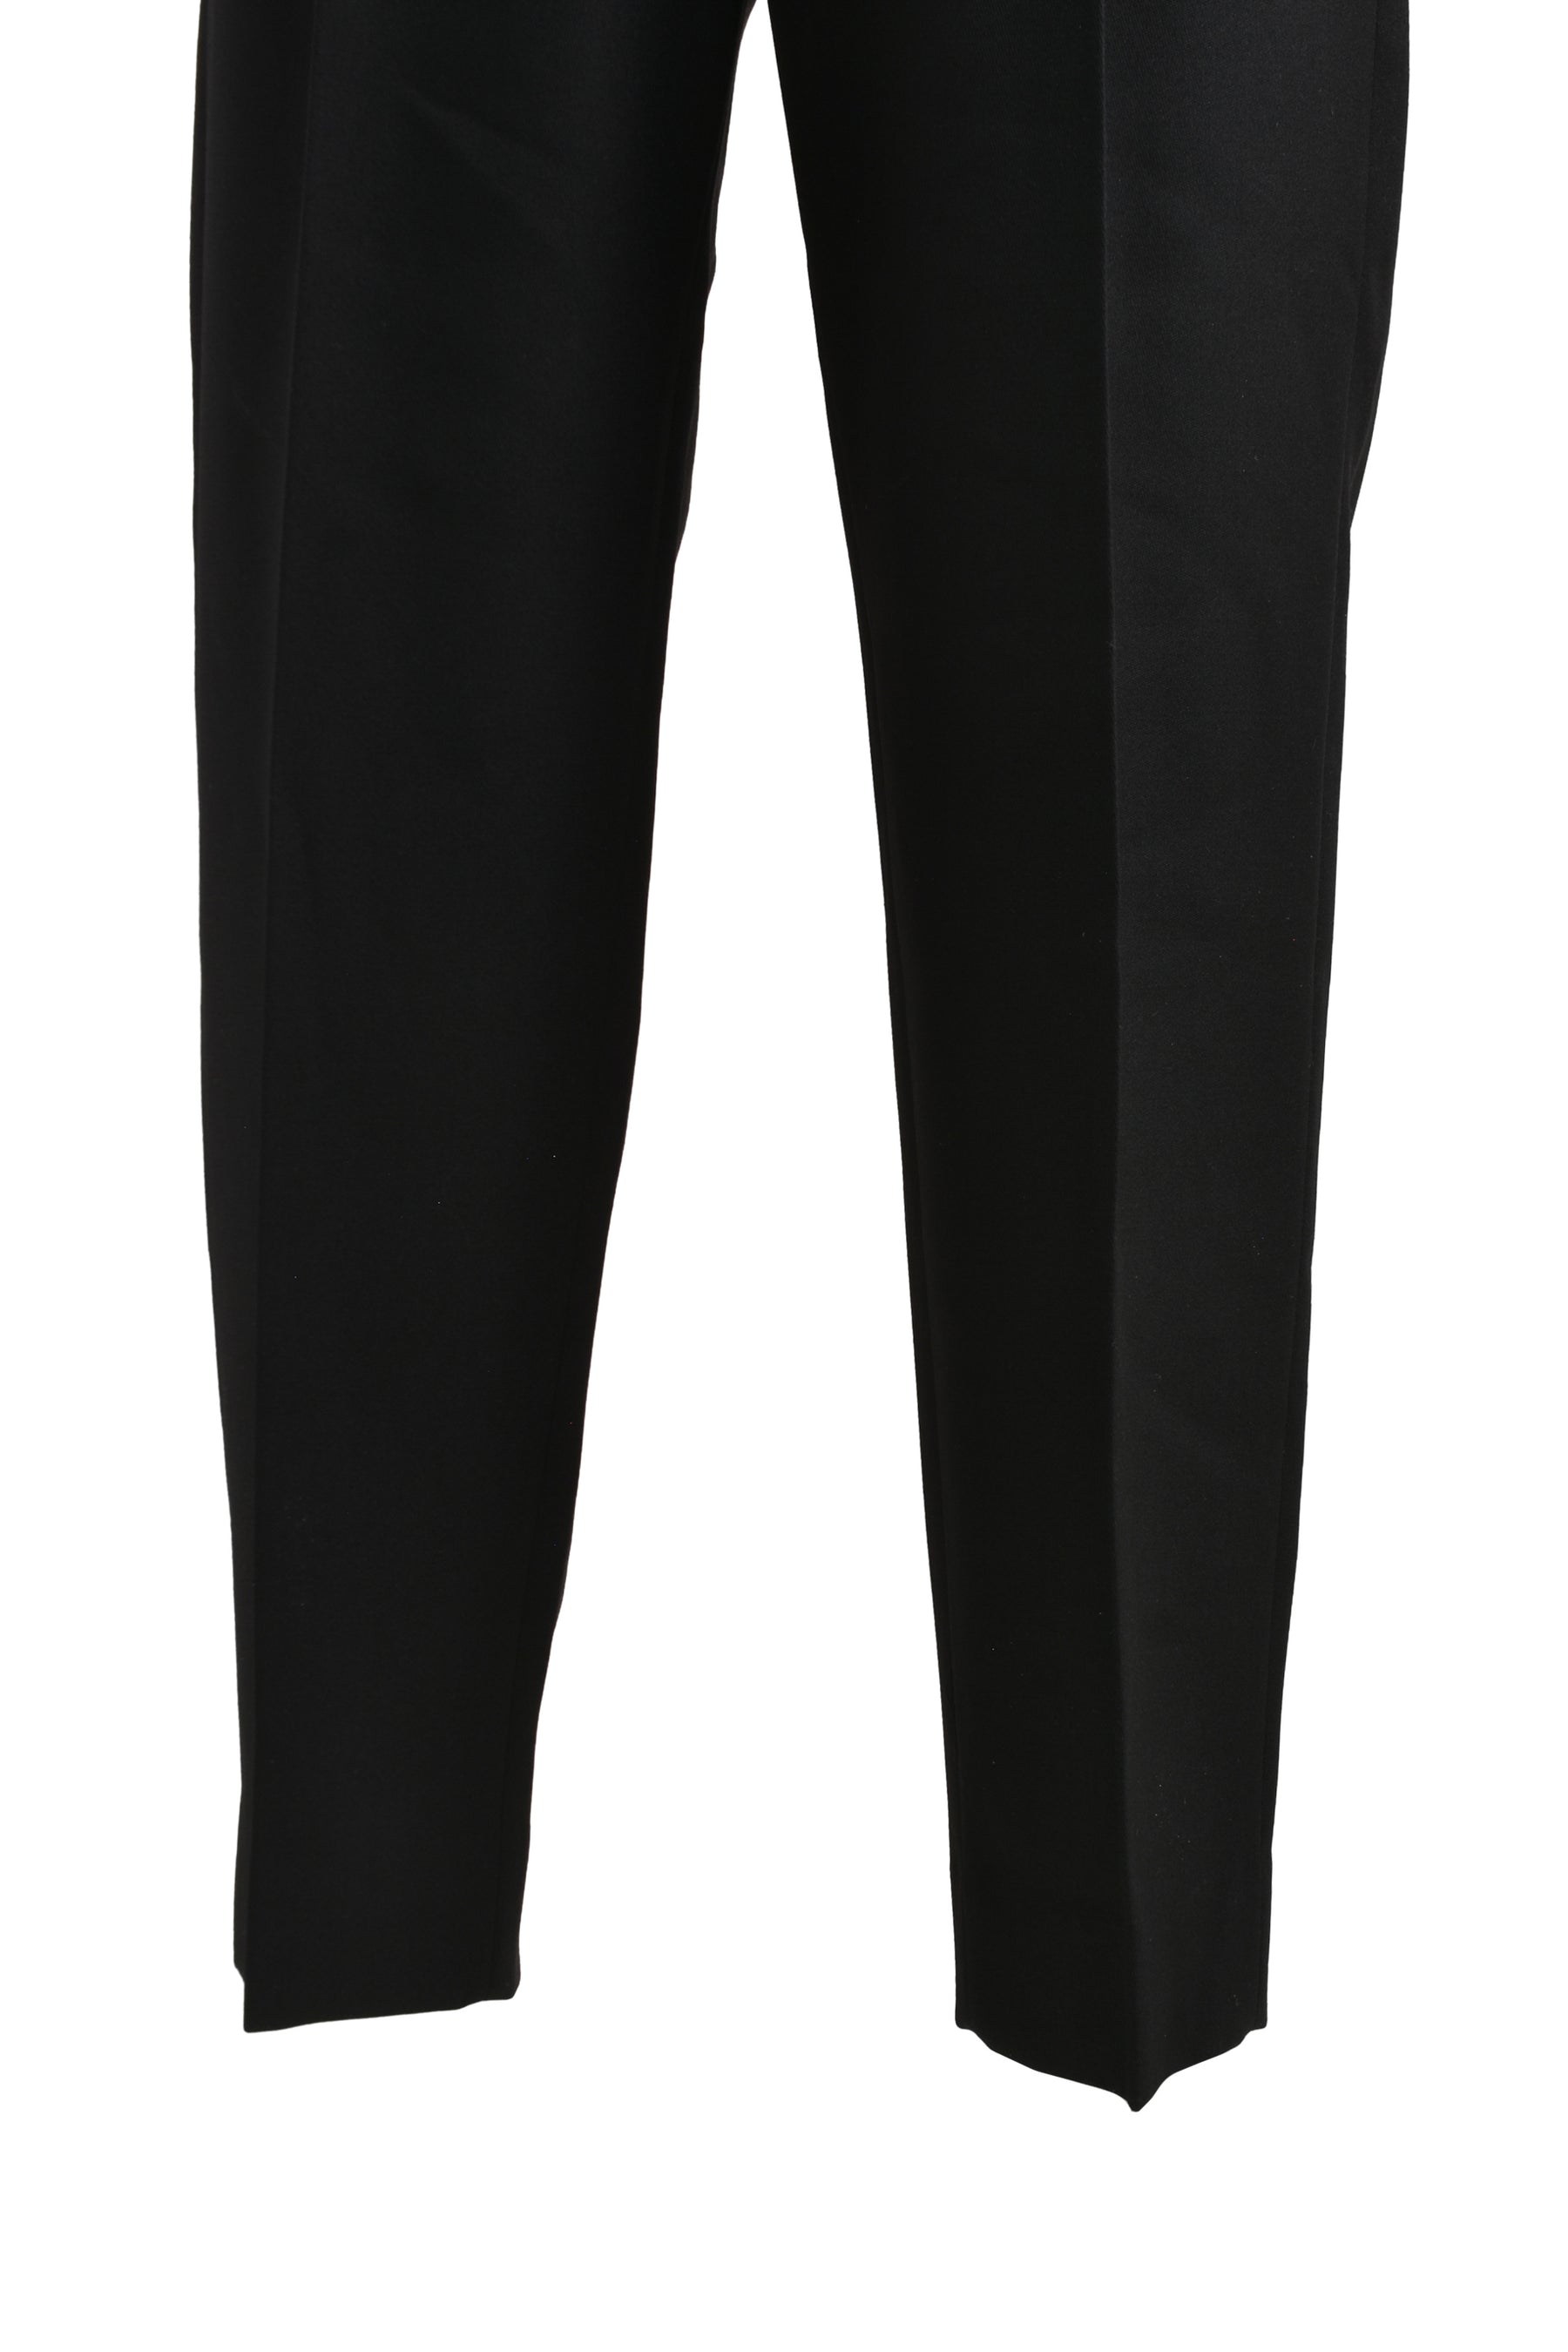 SINGLE PLEAT TAPERED TROUSER / BLK